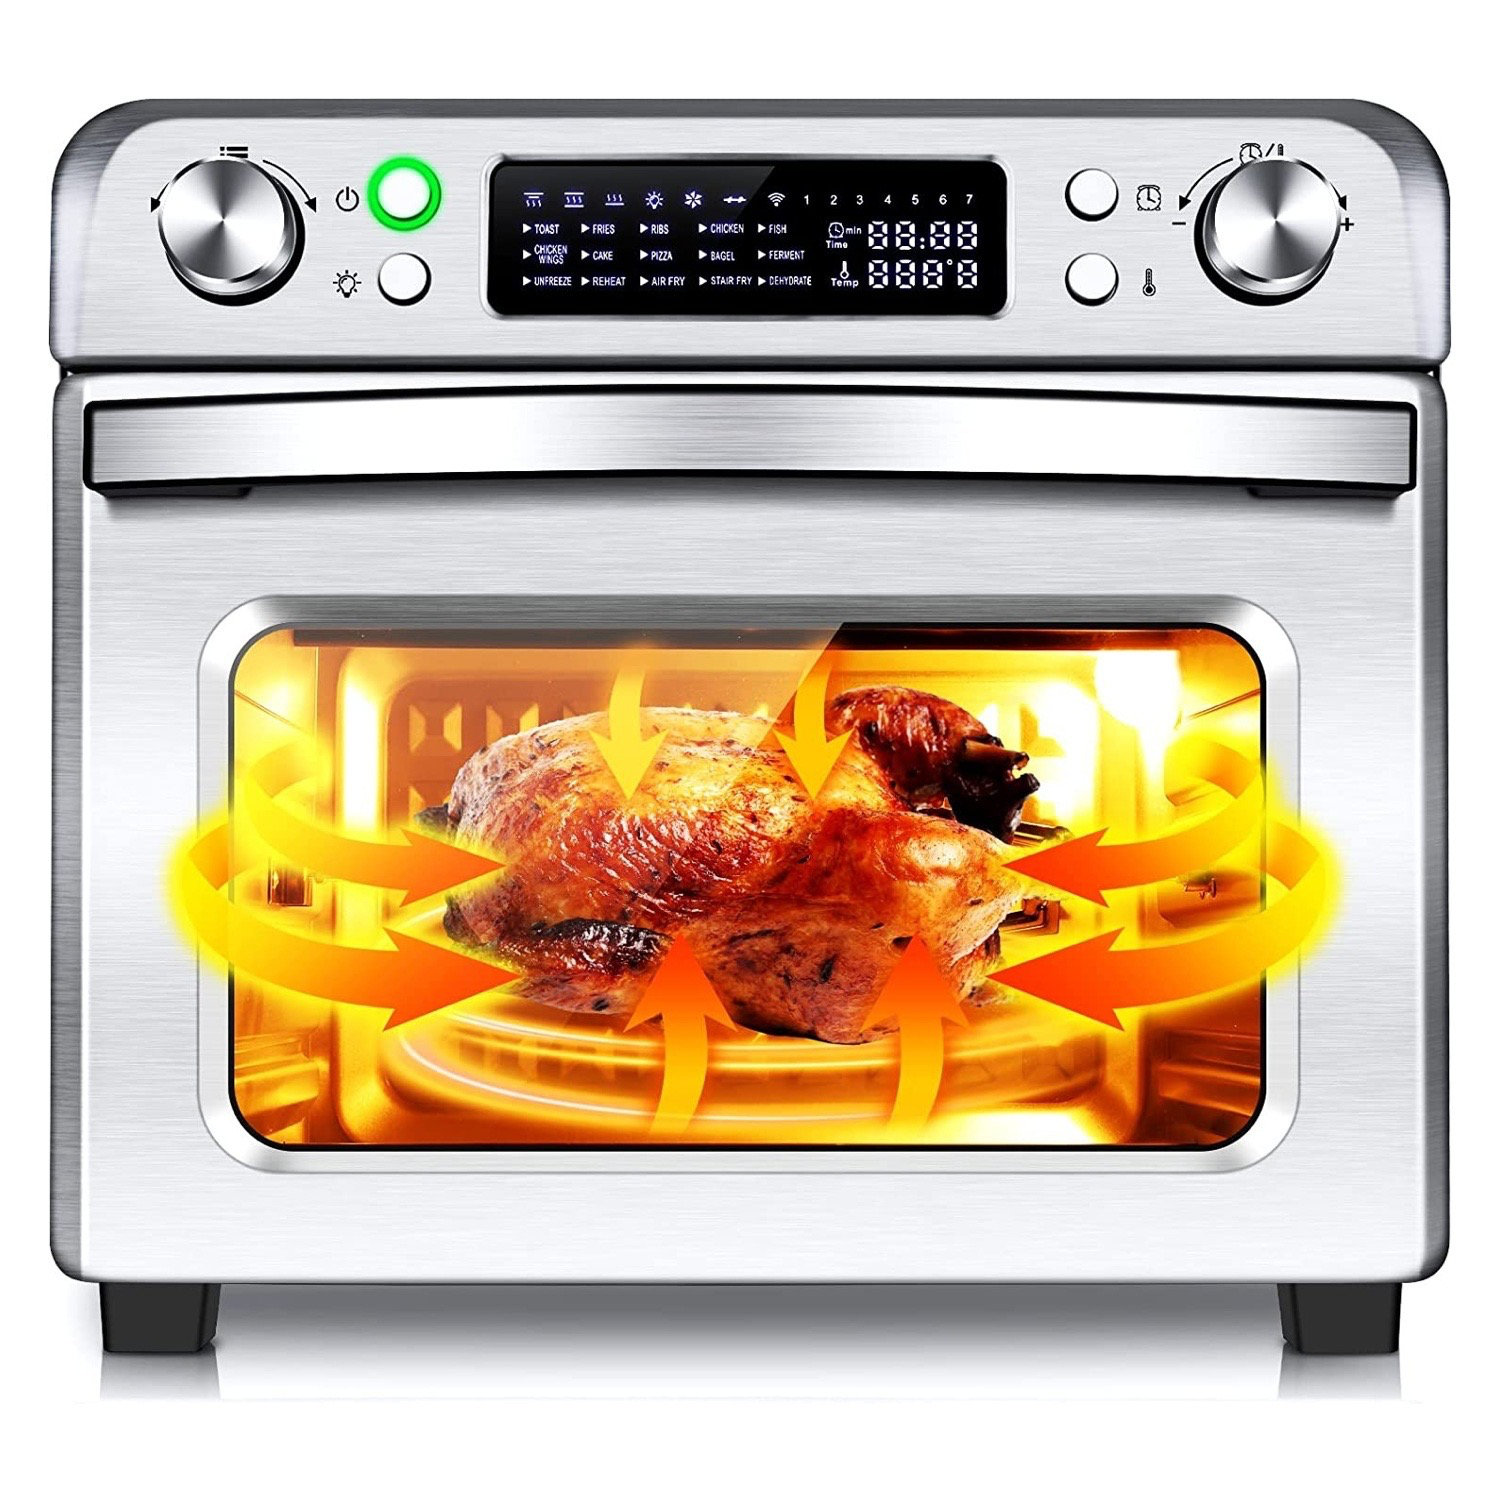 CUSIMAX Air Fryer Oven, 10-in-1 Convection Oven, 24QT Air Fryer